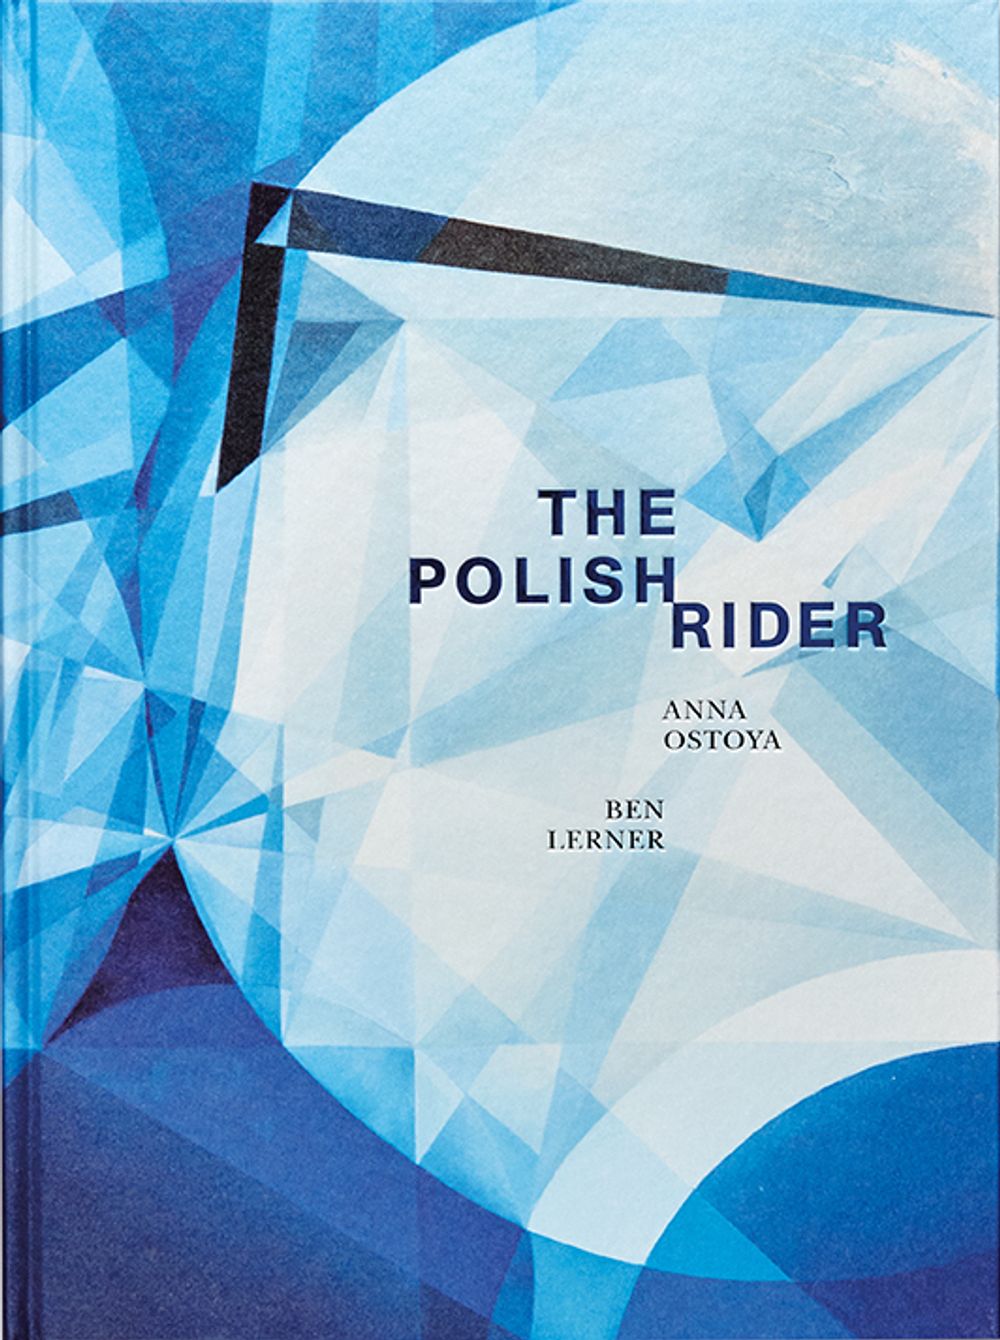 Book cover on plain gray background with title of The Polish Rider